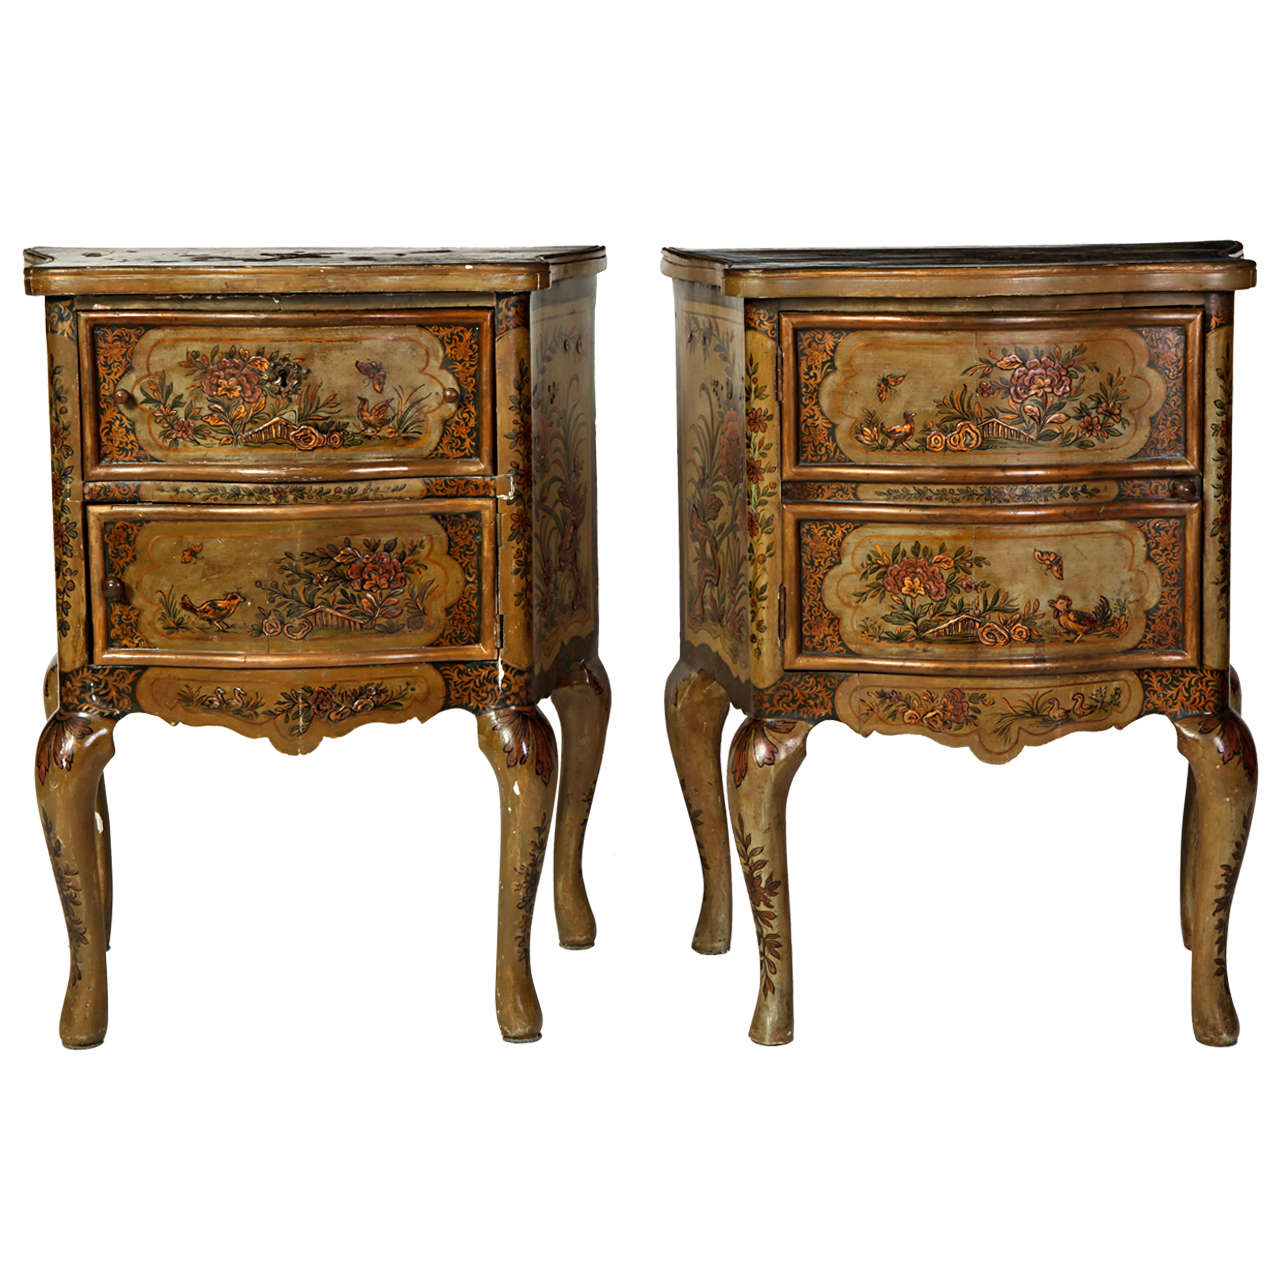 Pair of Small Italian Lacquered Commodes 19' century